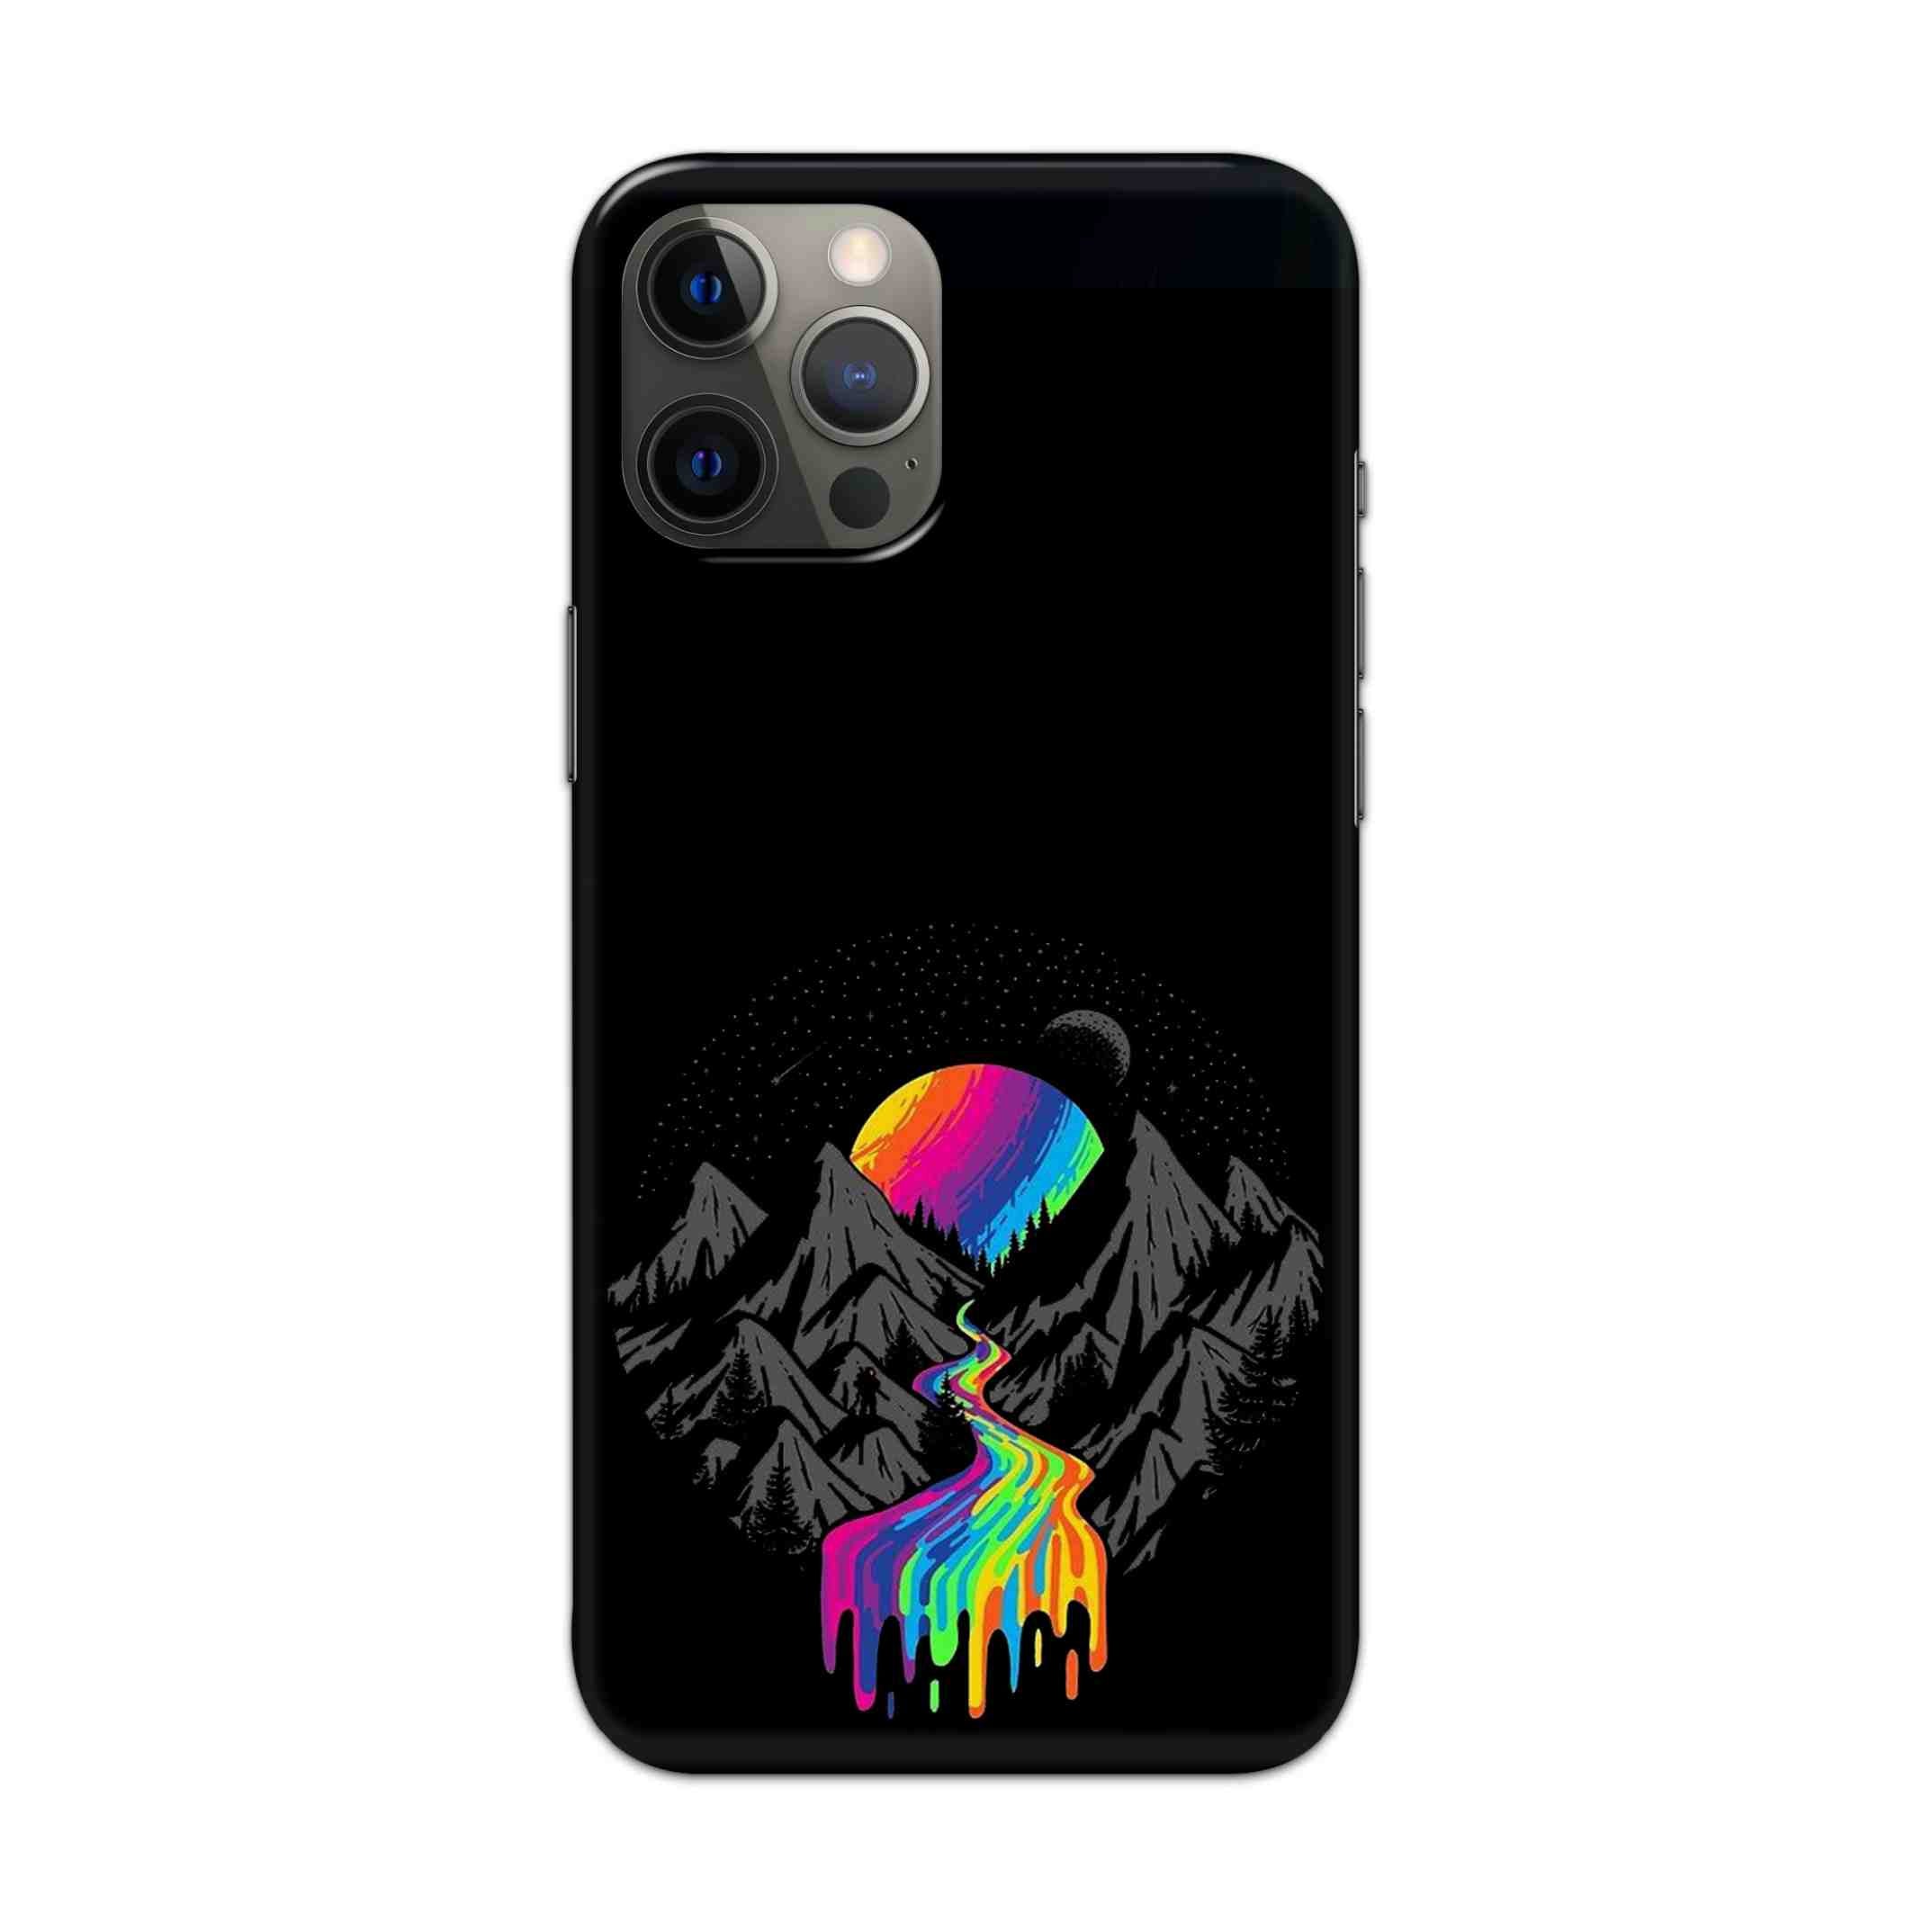 Buy Neon Mount Hard Back Mobile Phone Case/Cover For Apple iPhone 12 pro max Online